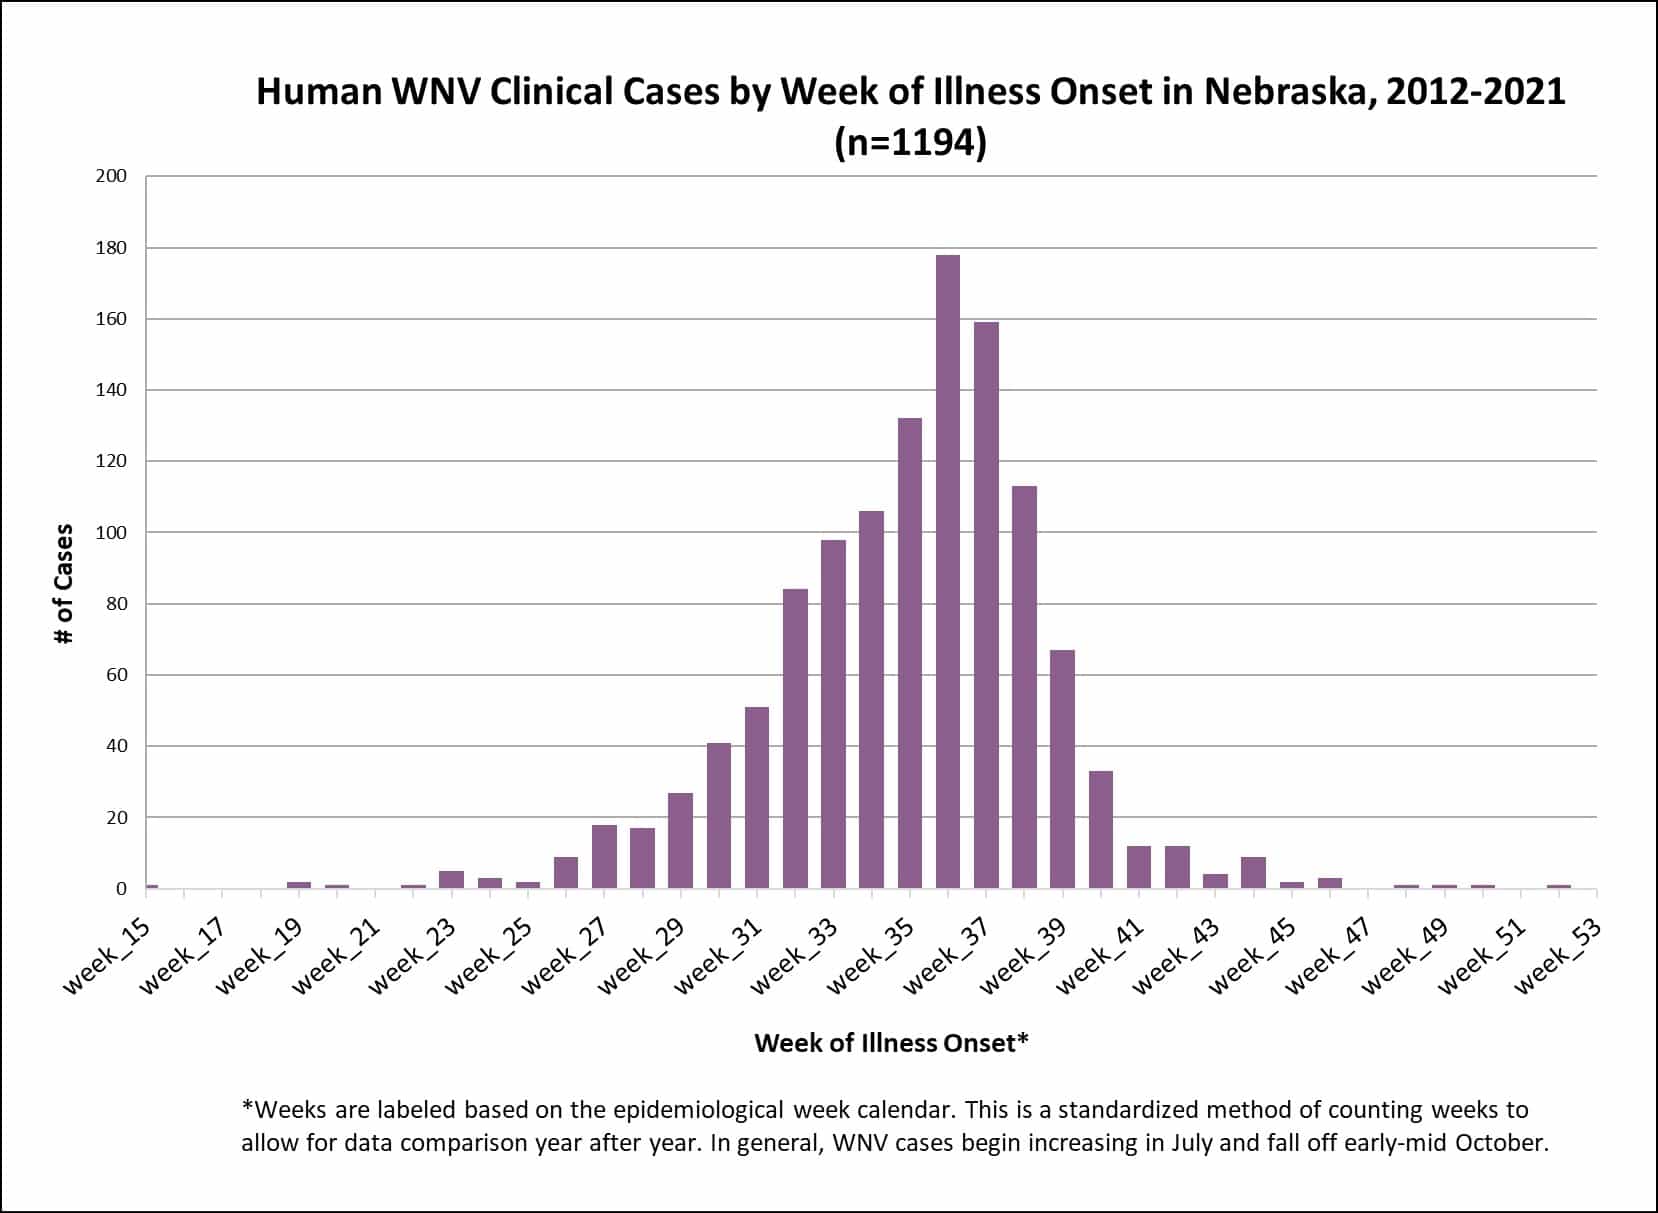 Human WNV Clinical Cases 2012-2021